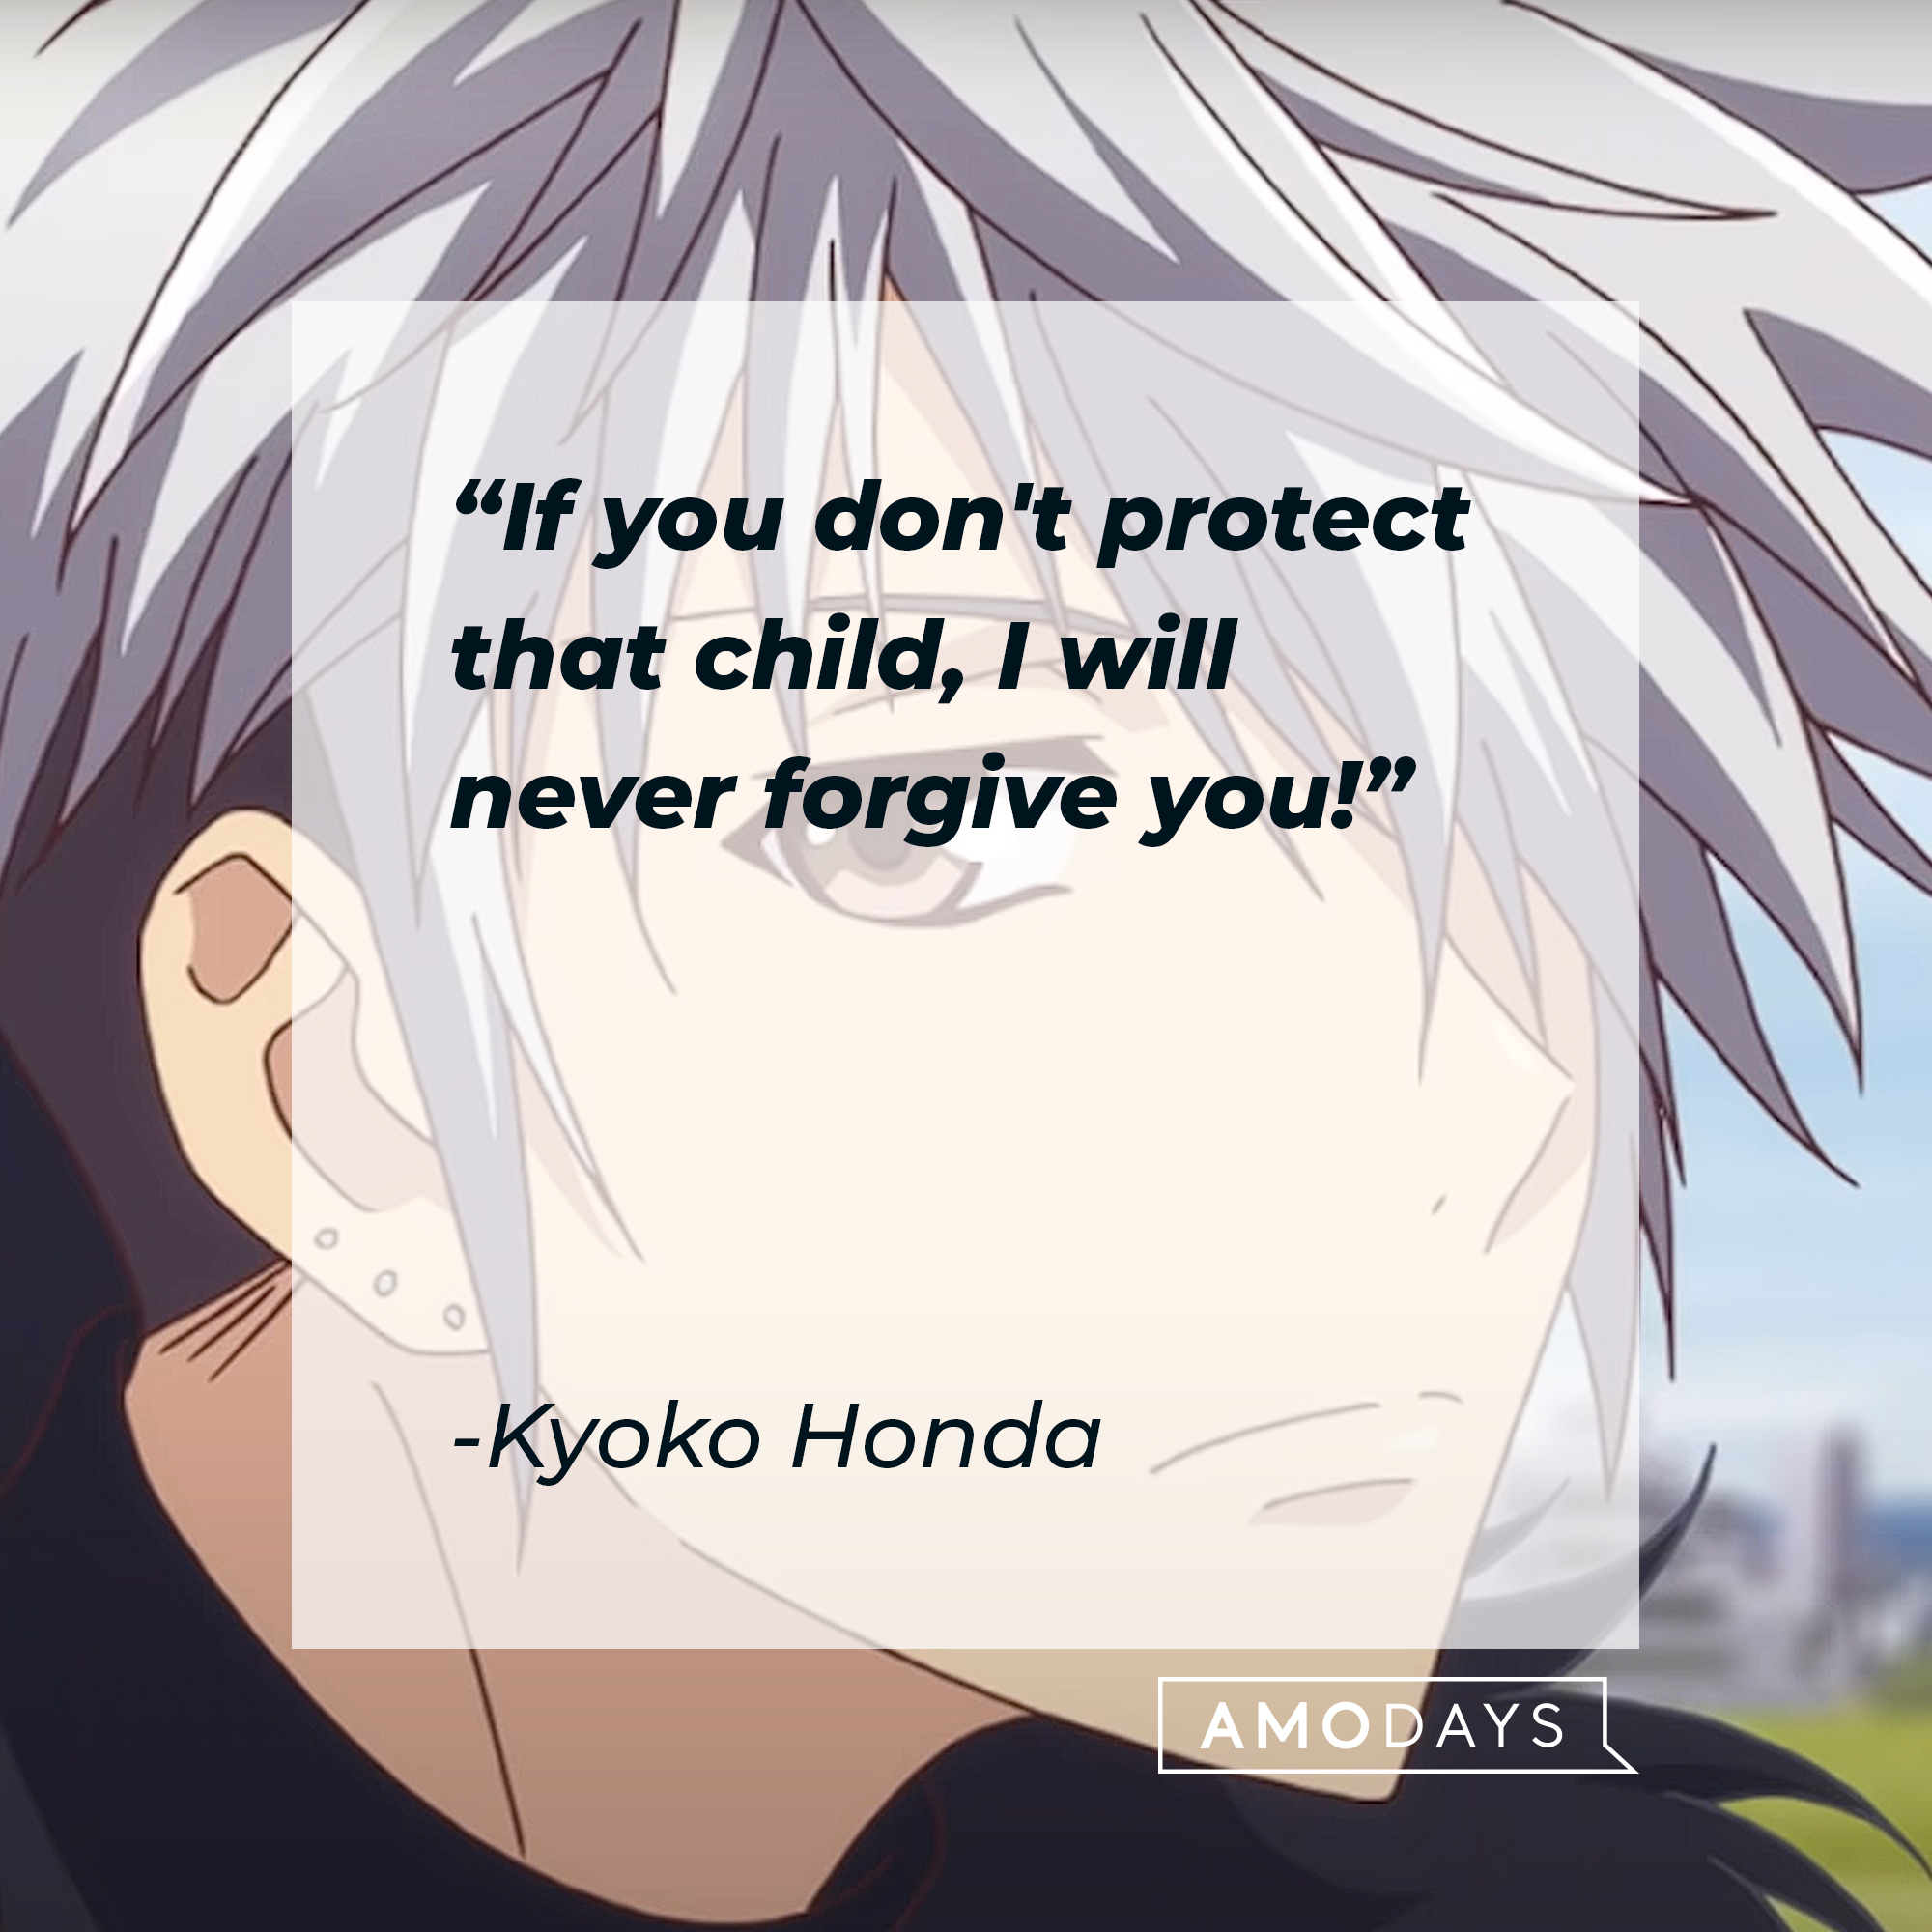 Kyoko Honda's quote: "If you don't protect that child, I will never forgive you!" | Image: youtube.com/Crunchyroll Collection